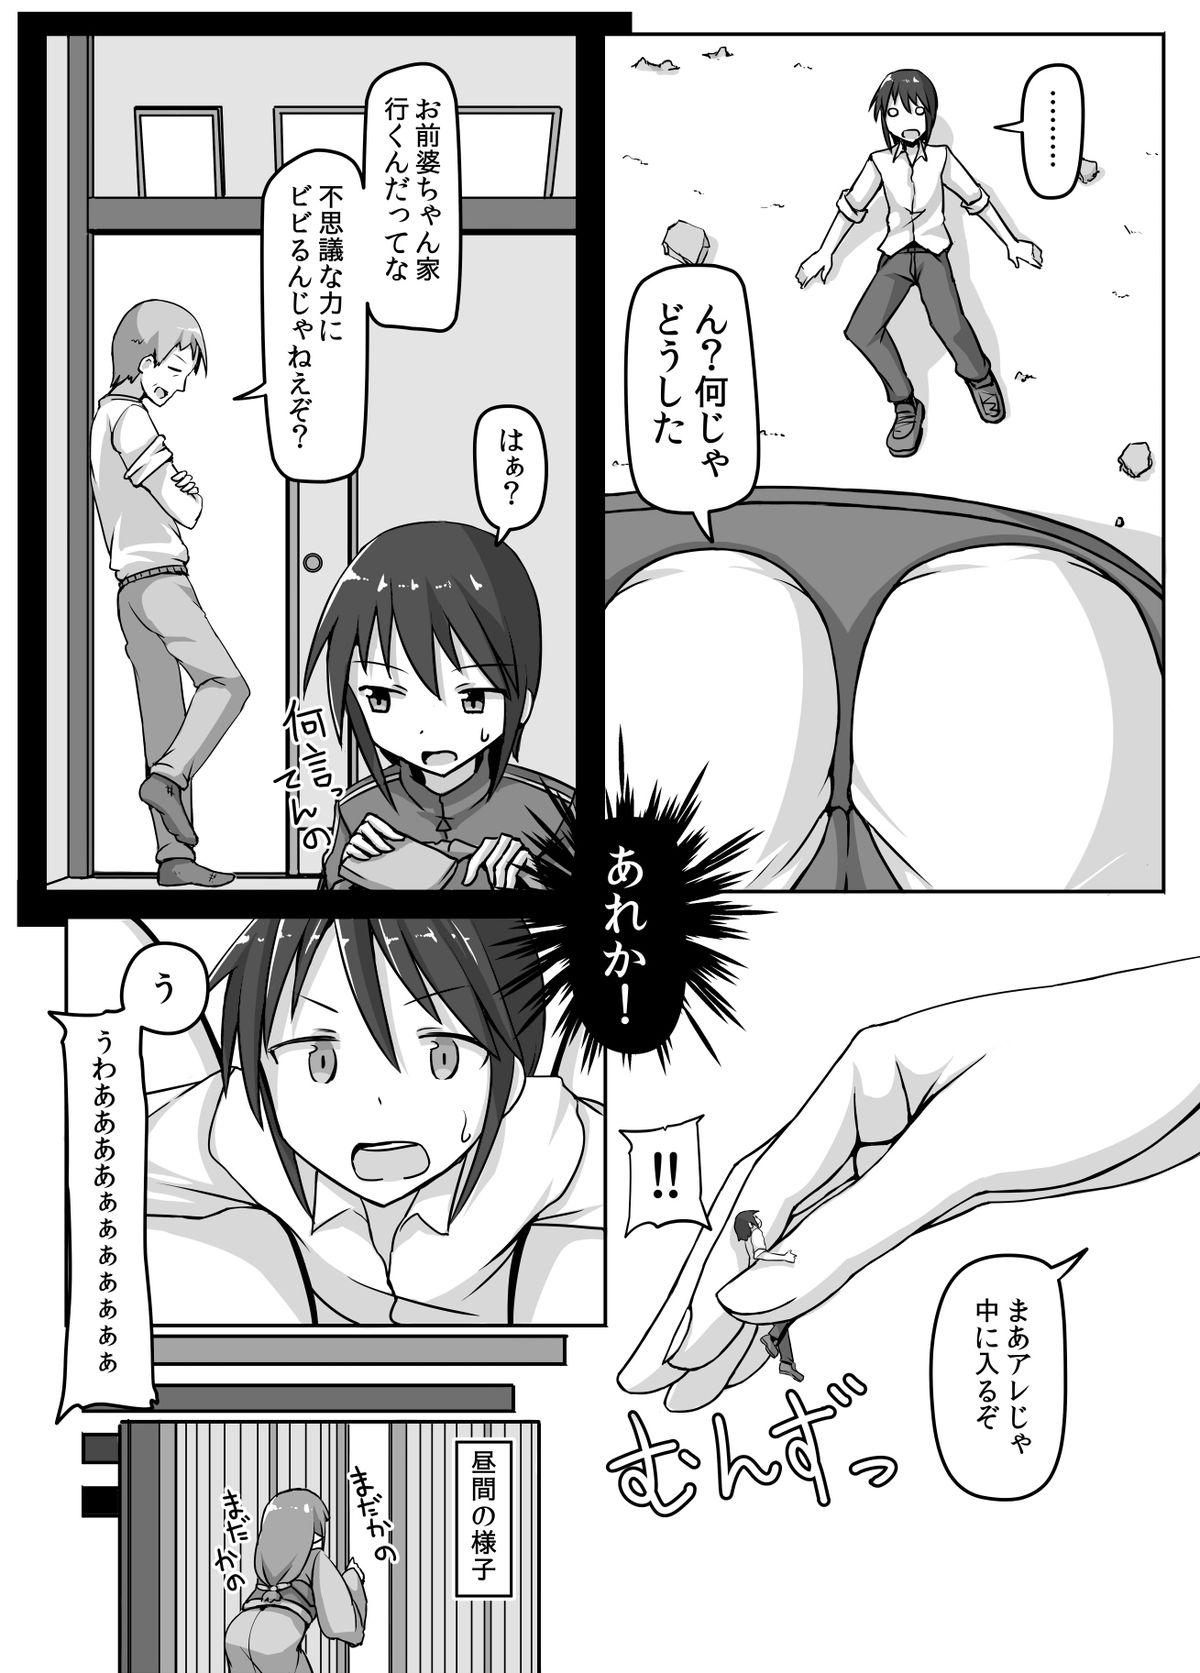 Straight Porn Size Fechi Loli Babaa Hon - Old Loli Size Fetish Book Les - Page 6